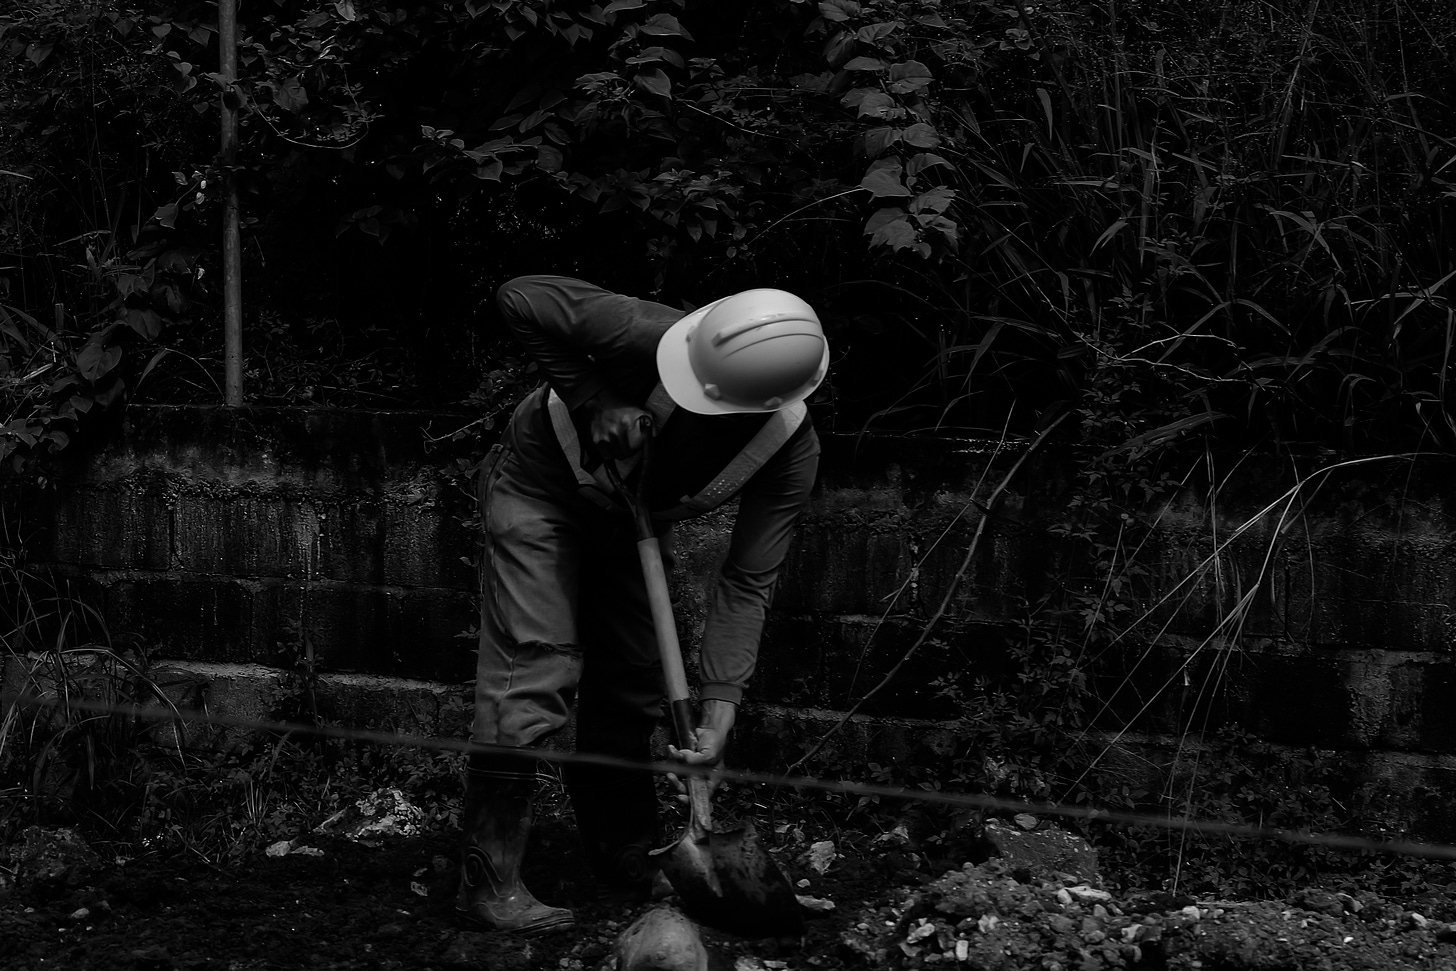 A man in a hard hat holds a spade in his hand, digging into the ground.